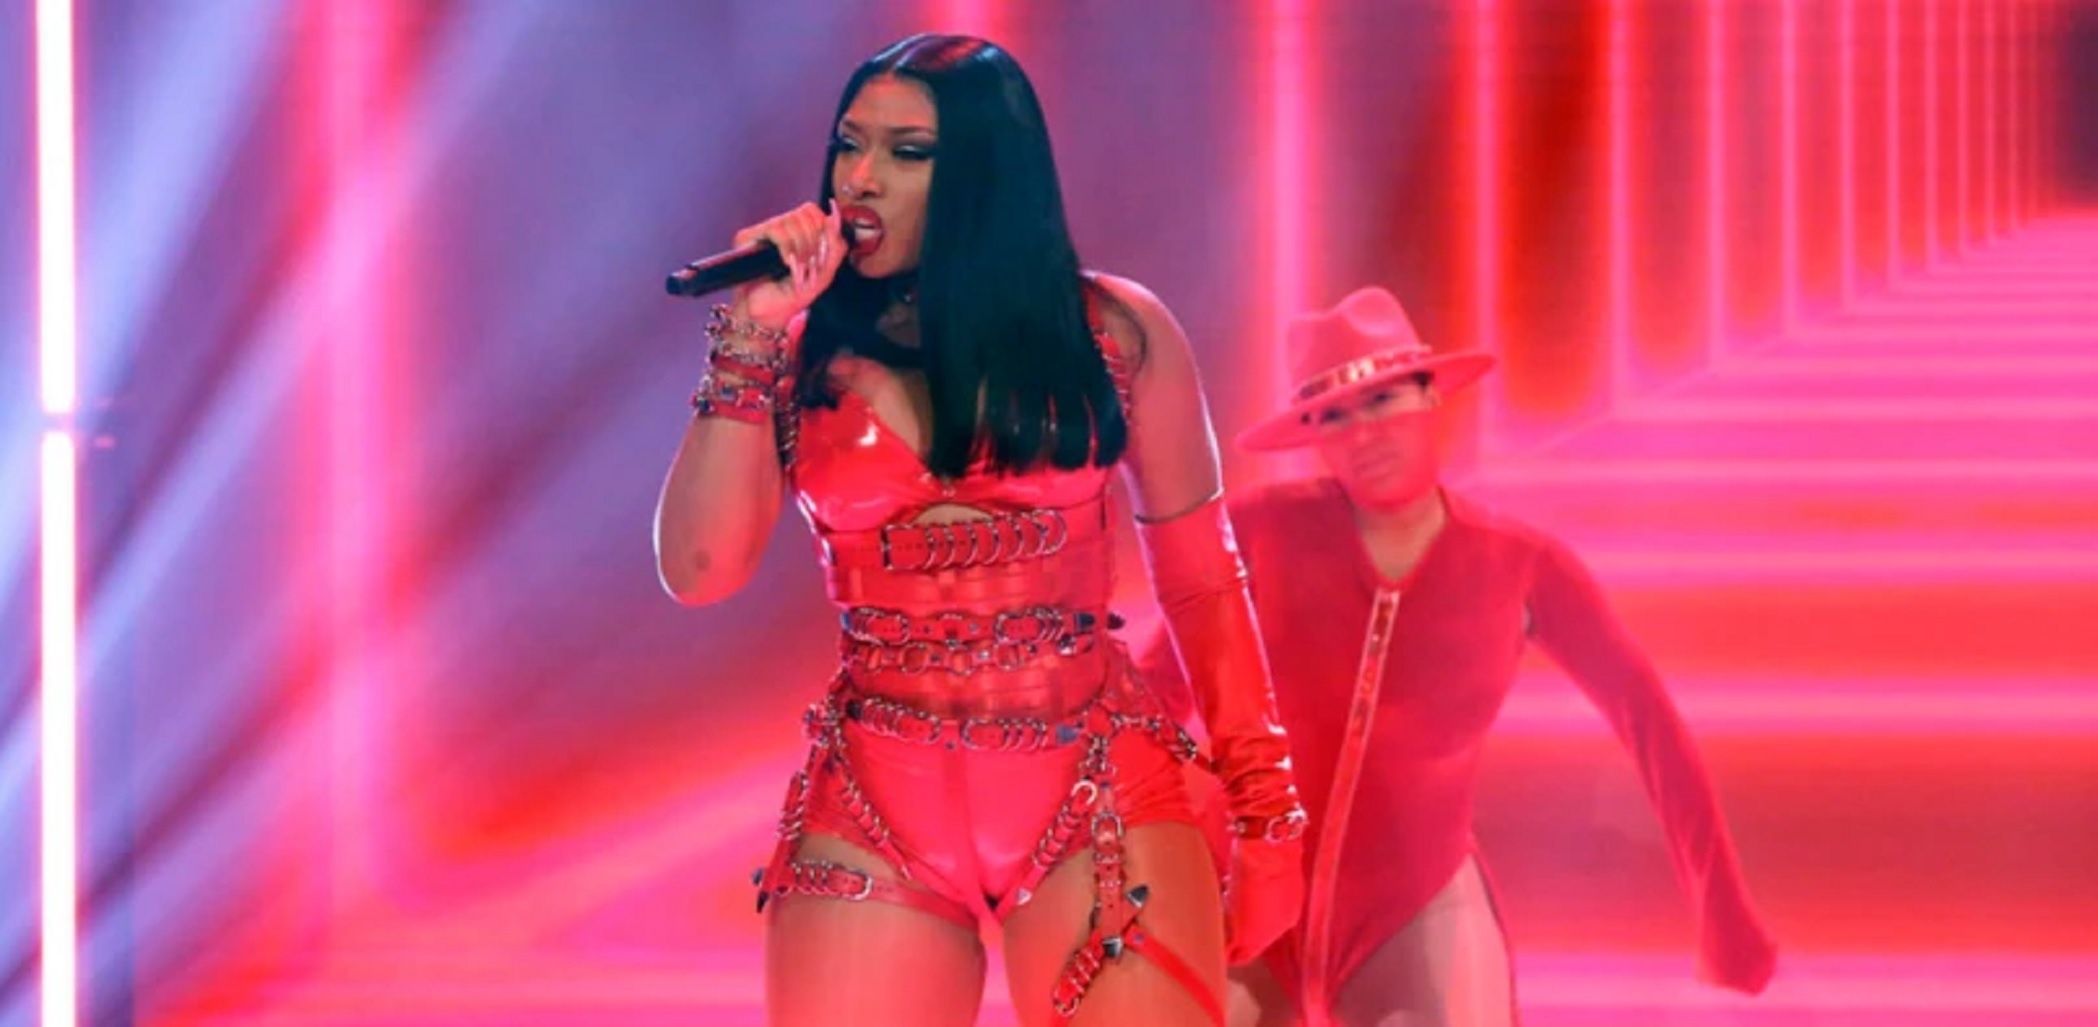 Did You Miss It? Megan Thee Stallion Performed New Song ‘B.I.T.C.H.’ on Jimmy Fallon!